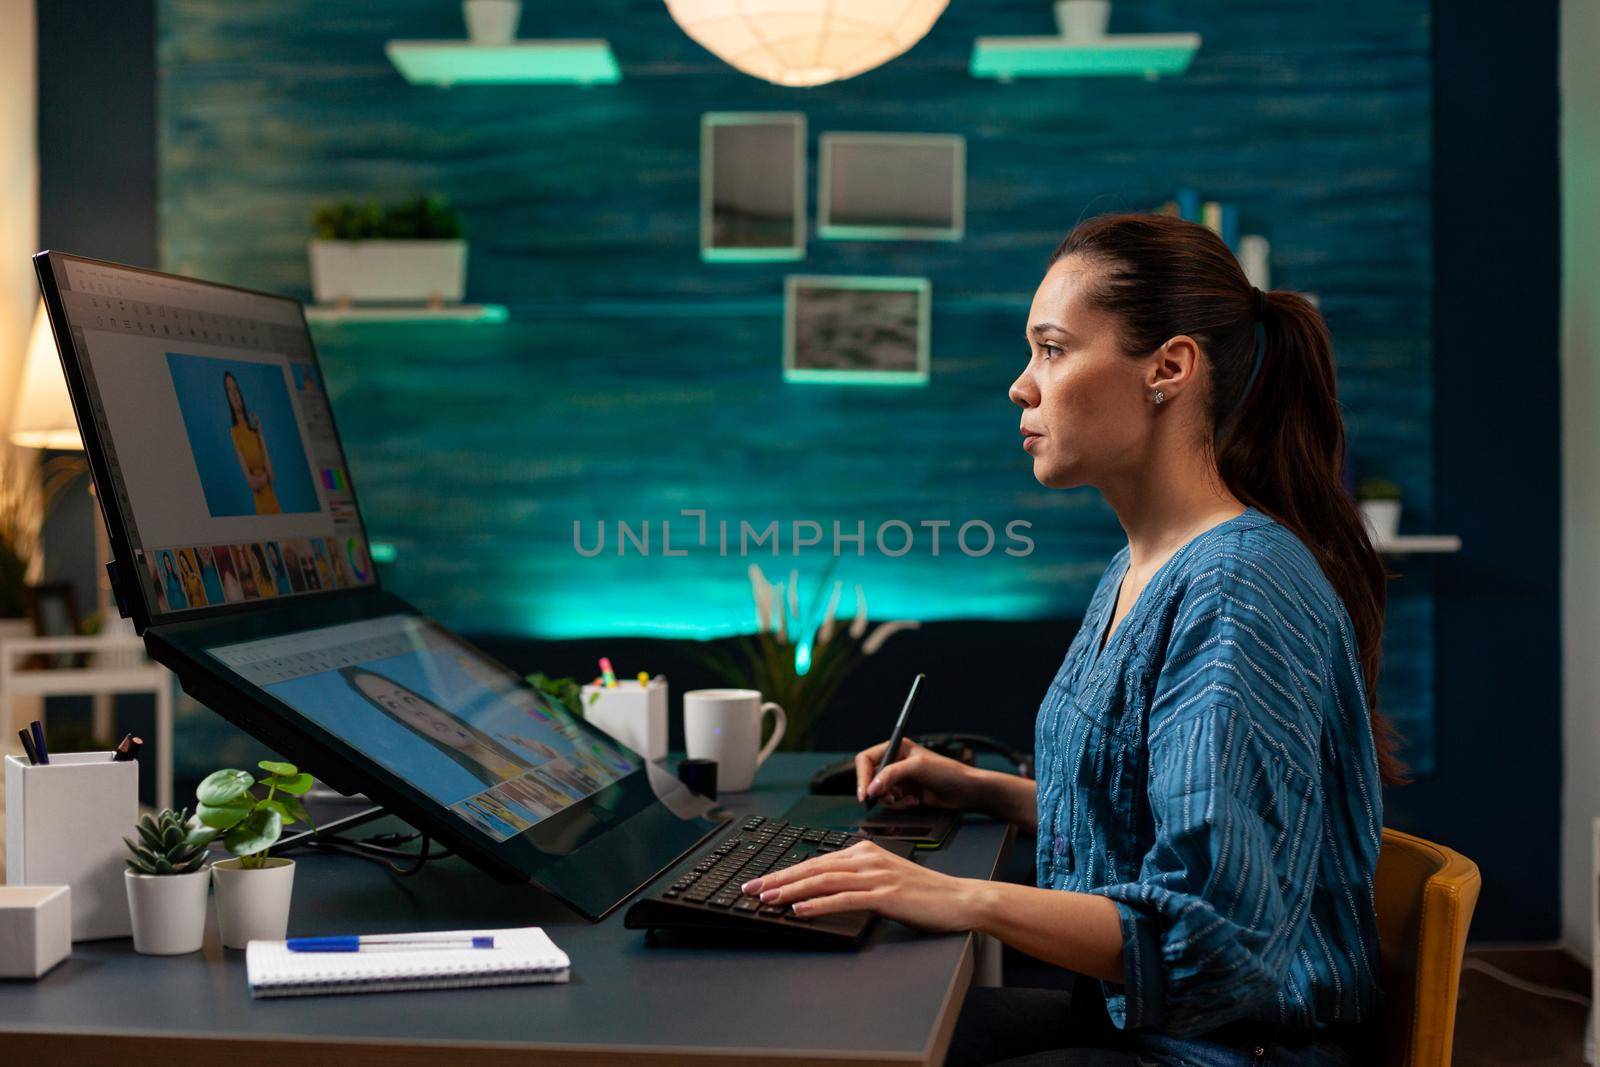 Photo editing specialist doing editor work with picture on computer display at artistic studio. Photographer woman retouching gradient on photo while using touchpad and stylus as tools